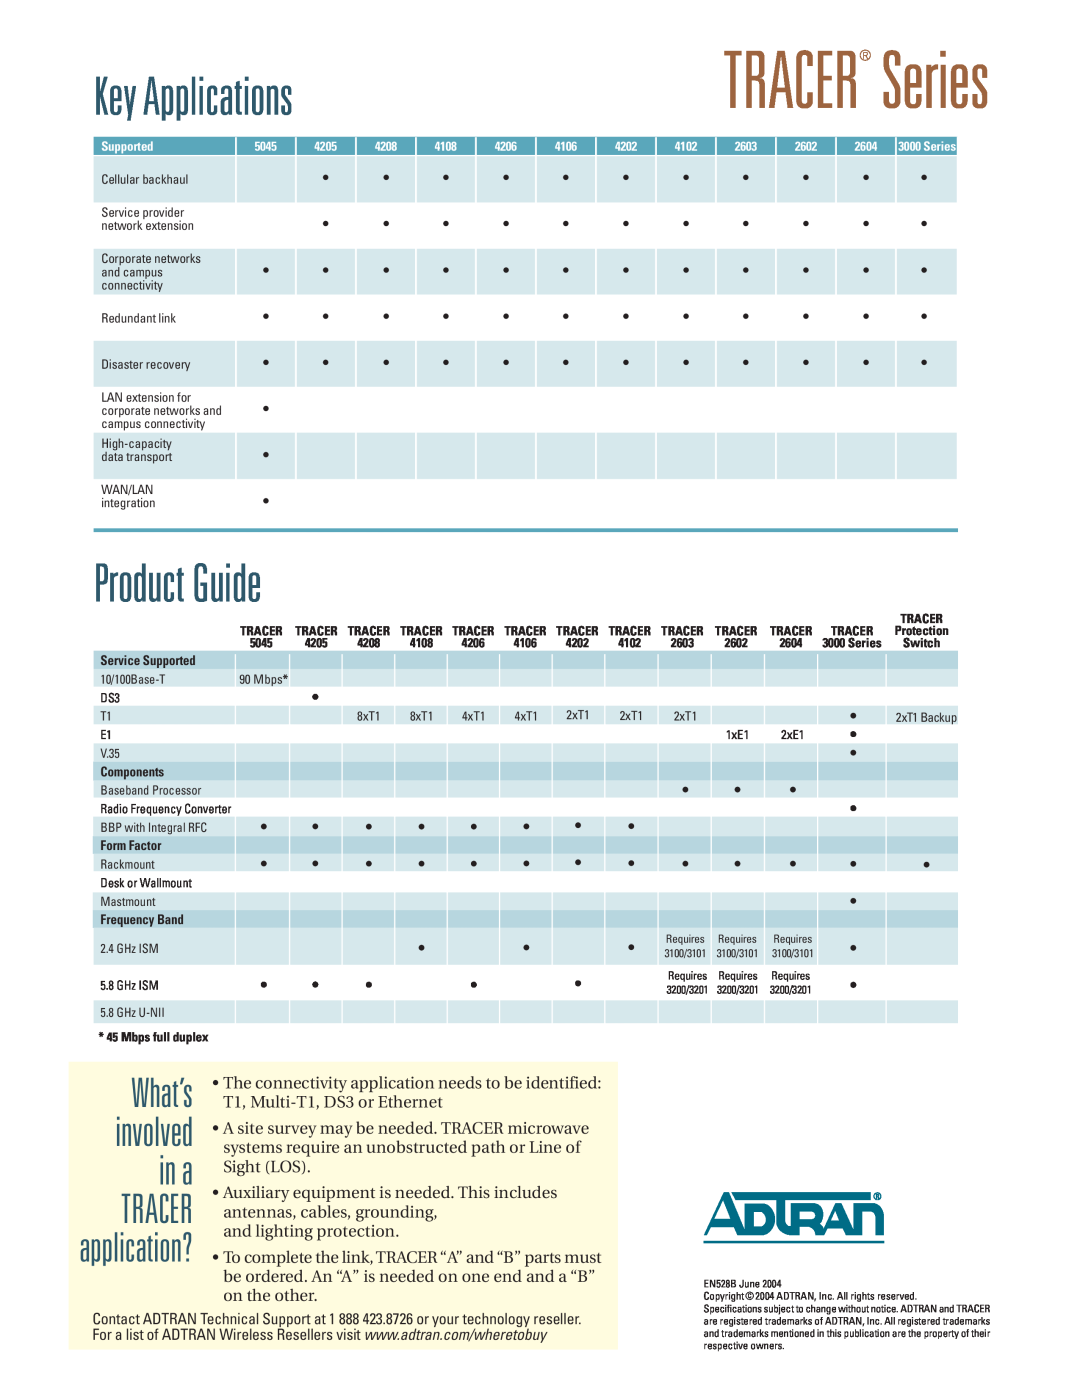 ADTRAN TRACER Series manual in a, What’s, Product Guide, involved, Tracer, Key Applications, application? 